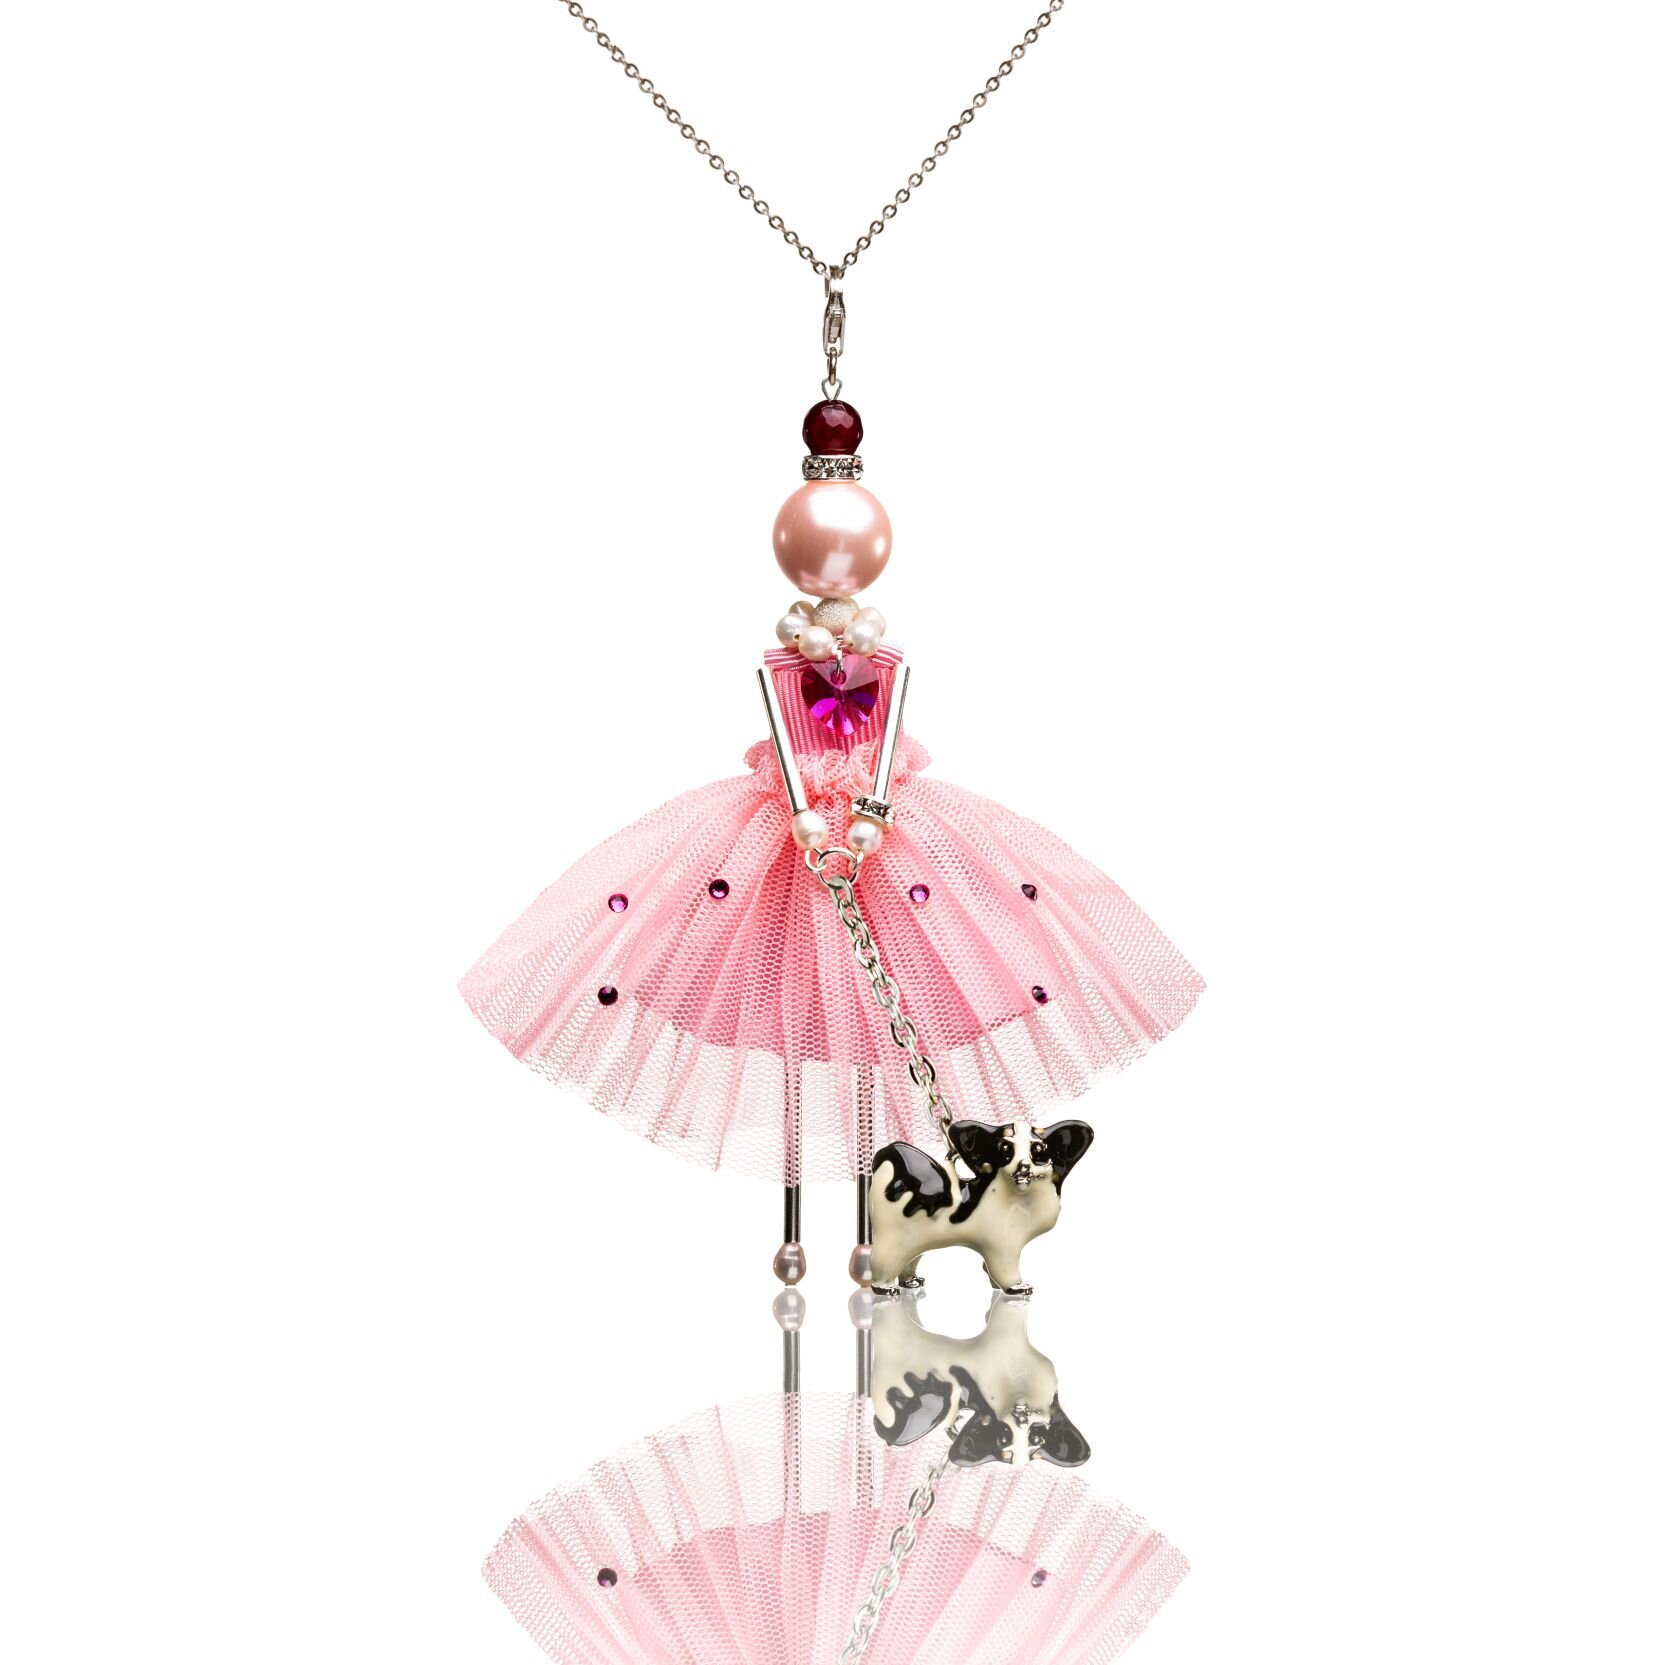 Fantastic pendant doll in pink with a dog.